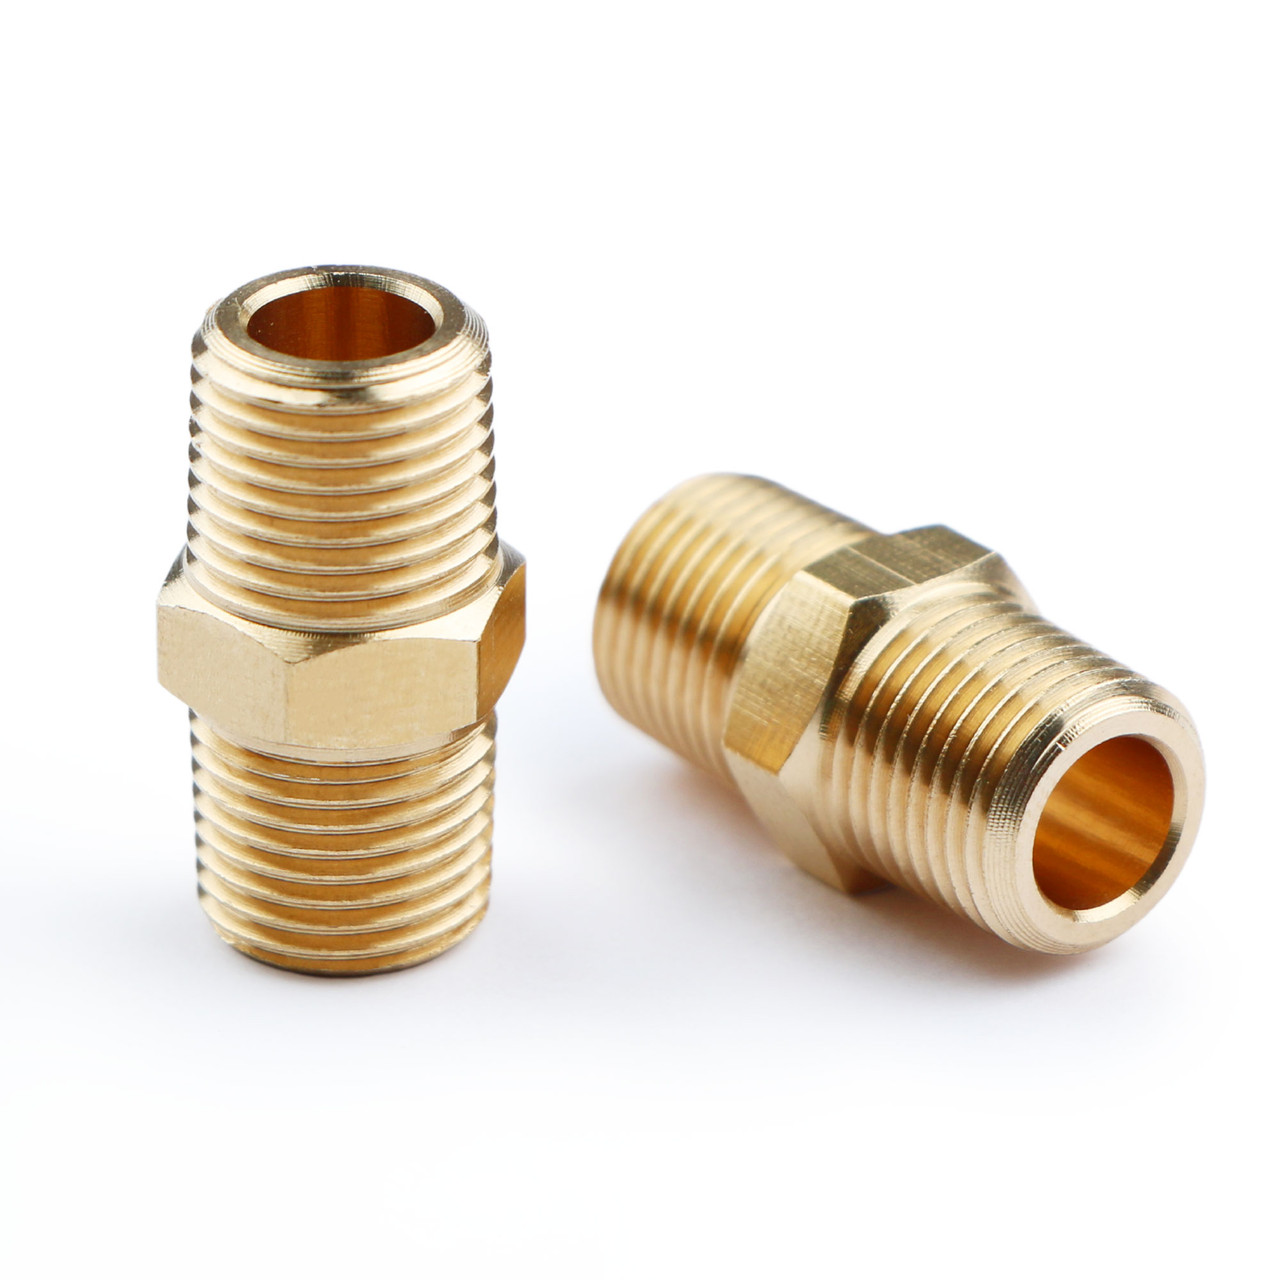  Coupling 1 inch Brass Pipe Fittings 1x1 Female Threaded Brass  Reducing Coupling Pipe Coupling 1 Female : Industrial & Scientific